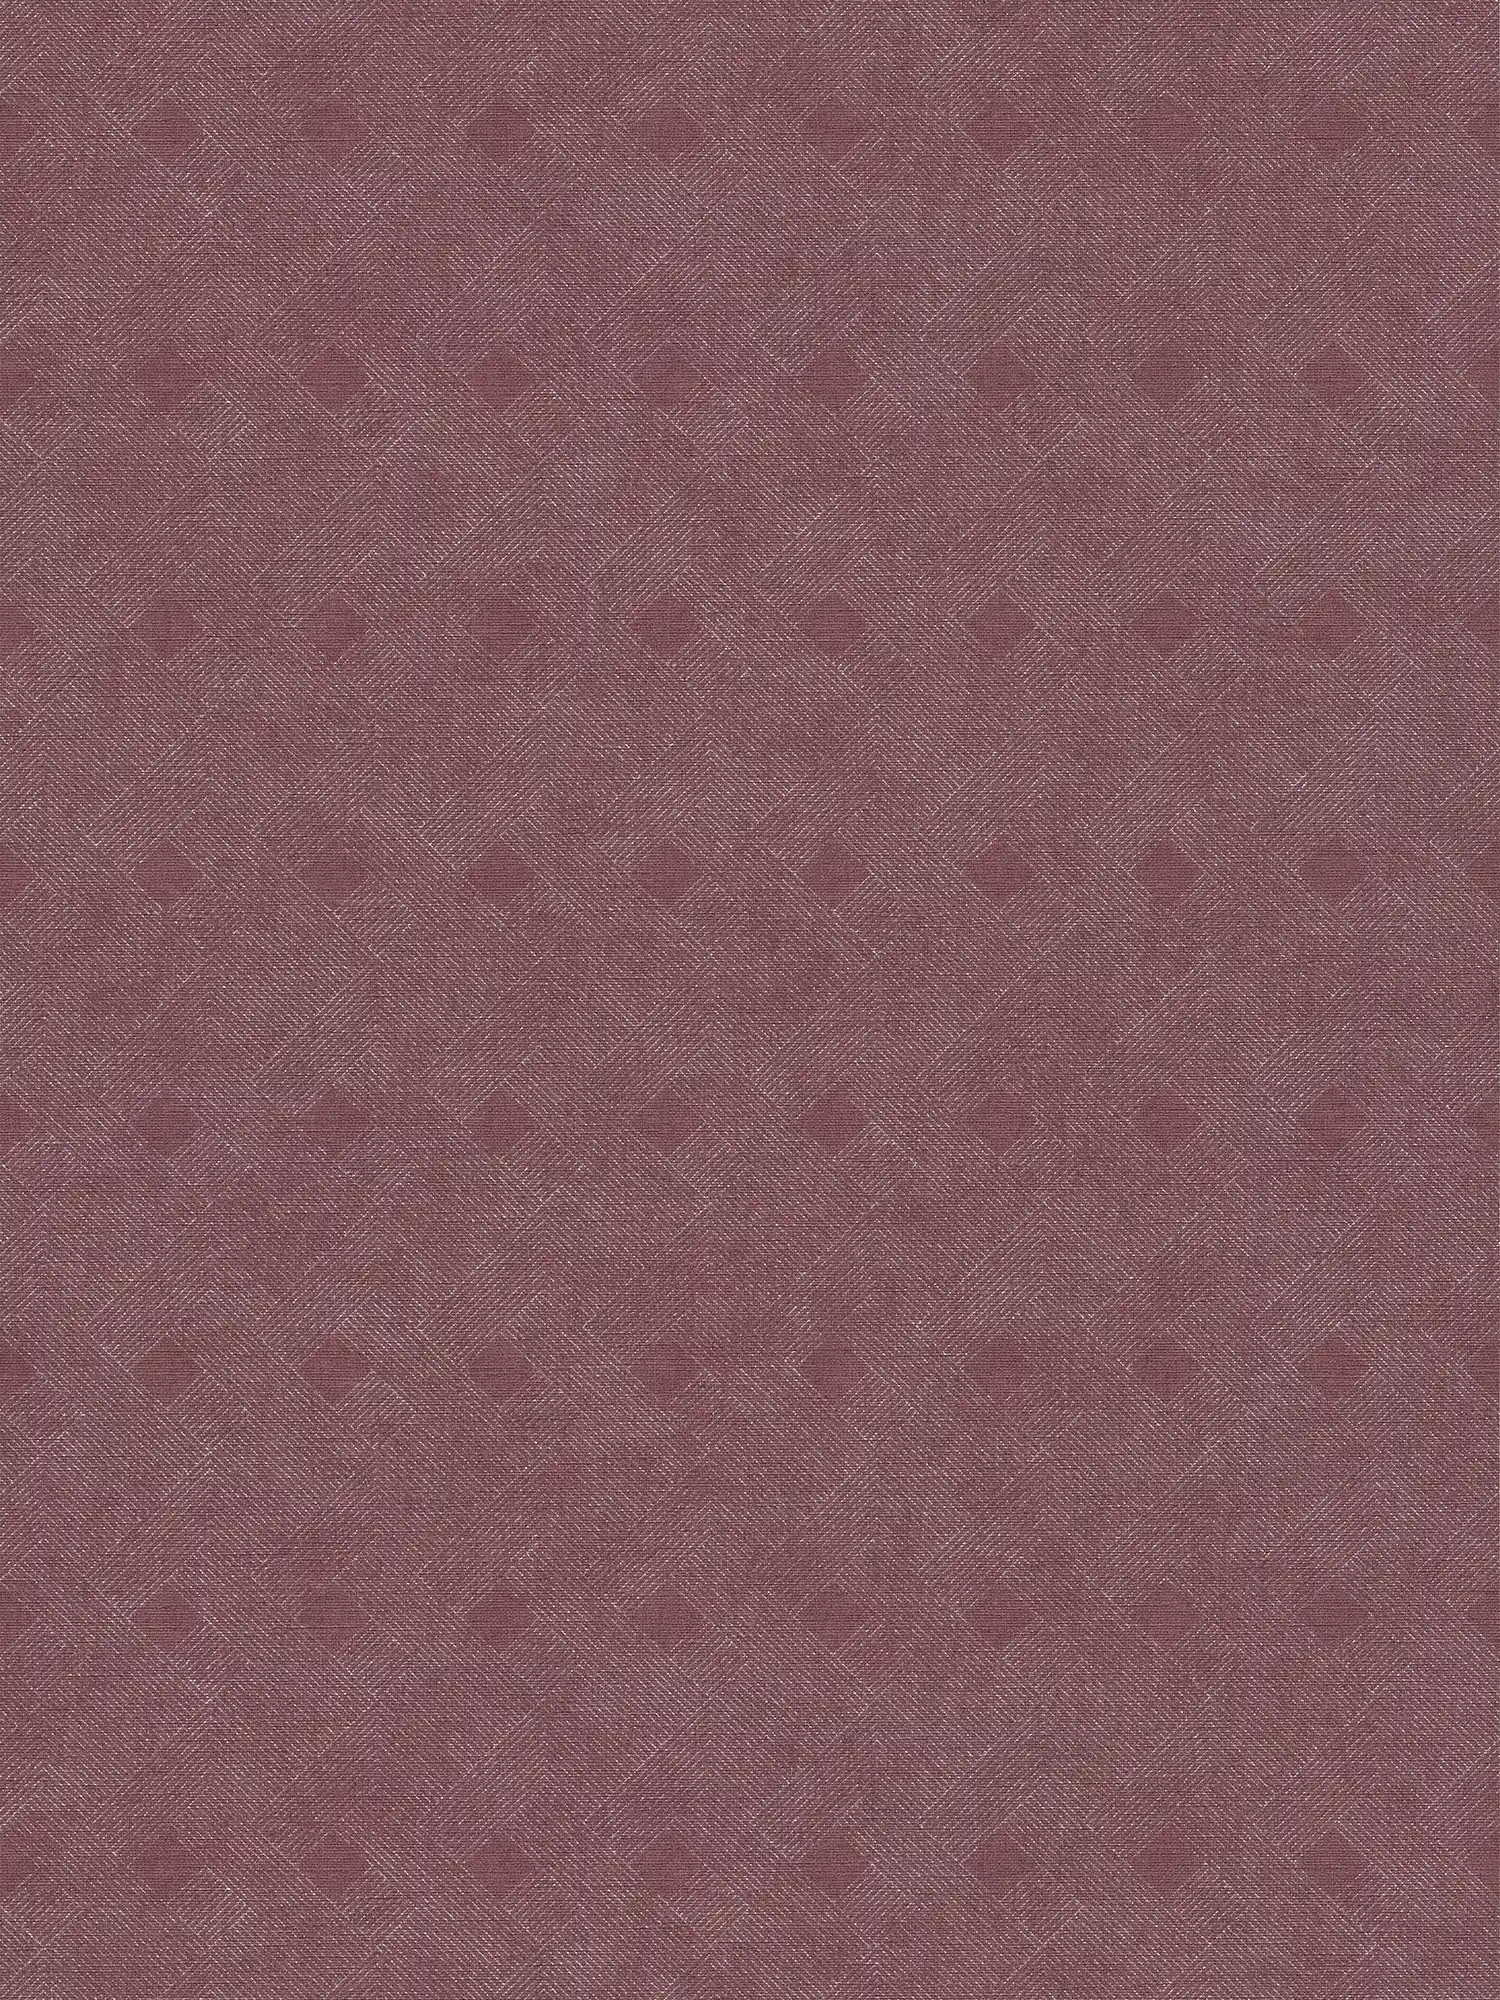 Wine red wallpaper with golden lines pattern in used look - metallic, red
